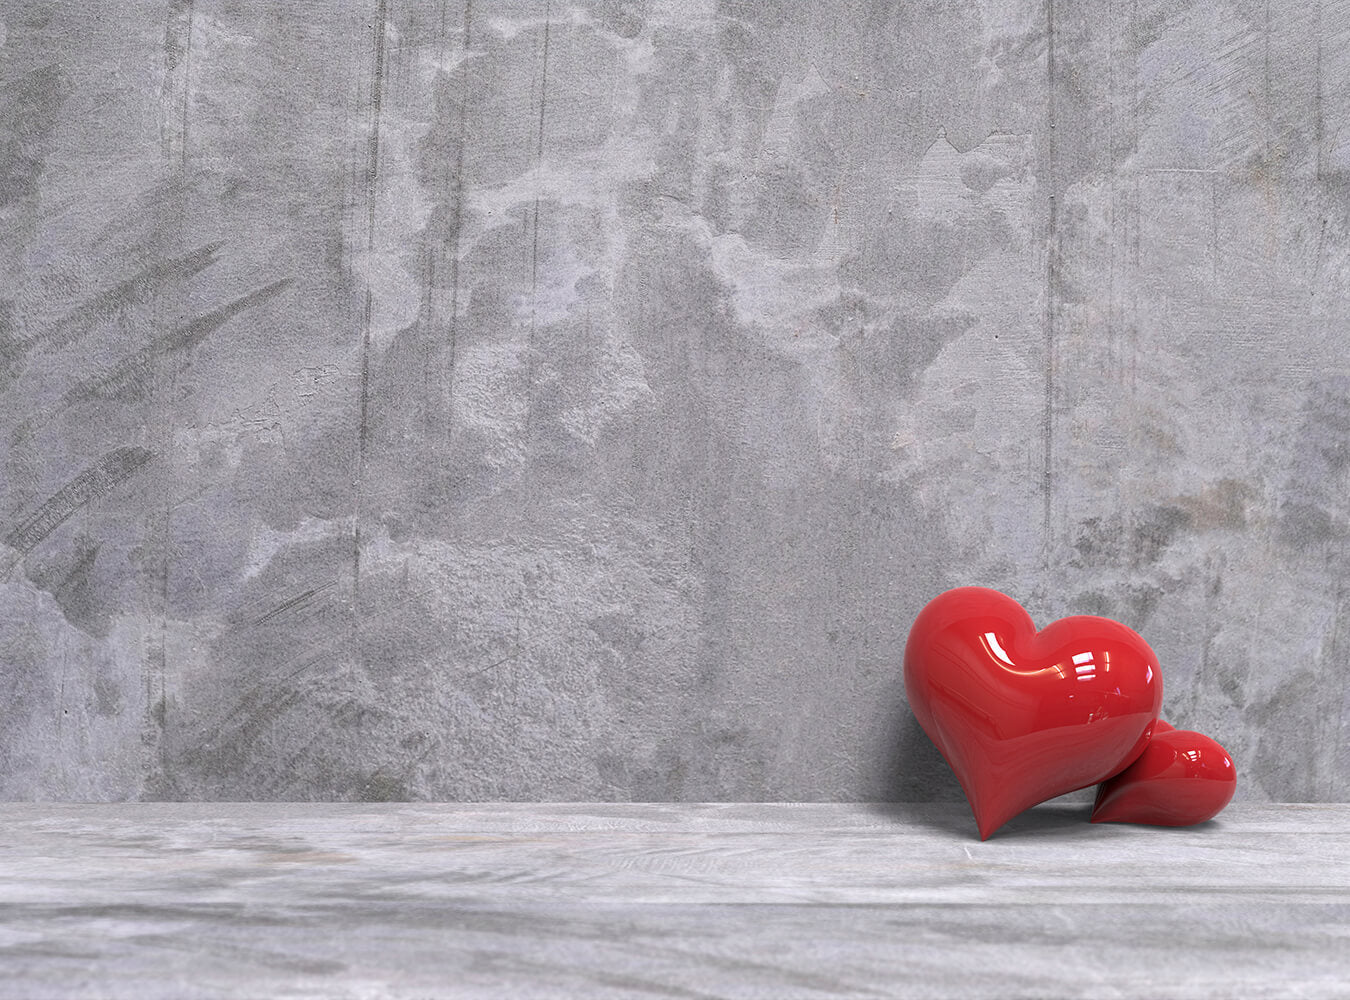 Abstract Grey Wall With Red Heart For Valentine's Day Studio Portrait Photography Backdrop IBD-24404